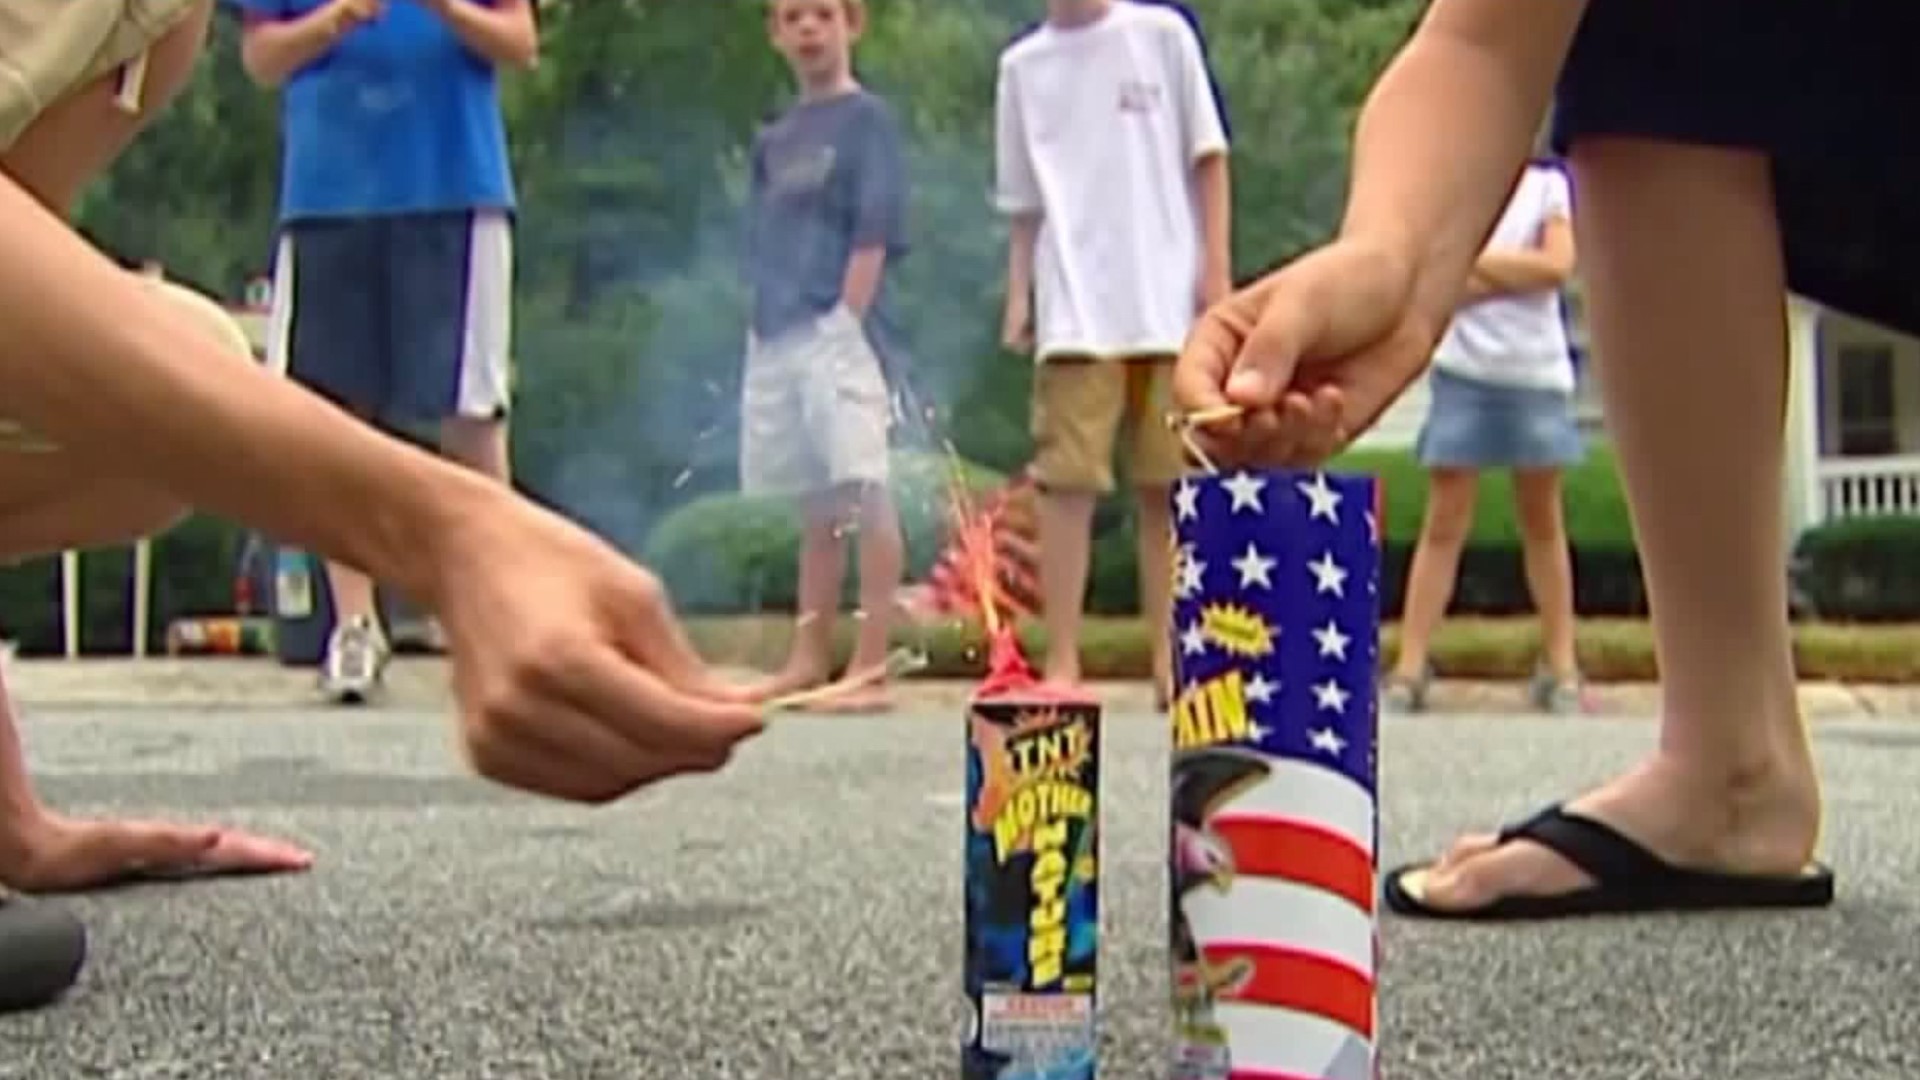 An expanded burn ban in York County prohibits using private fireworks until July 12 amid dry weather conditions.